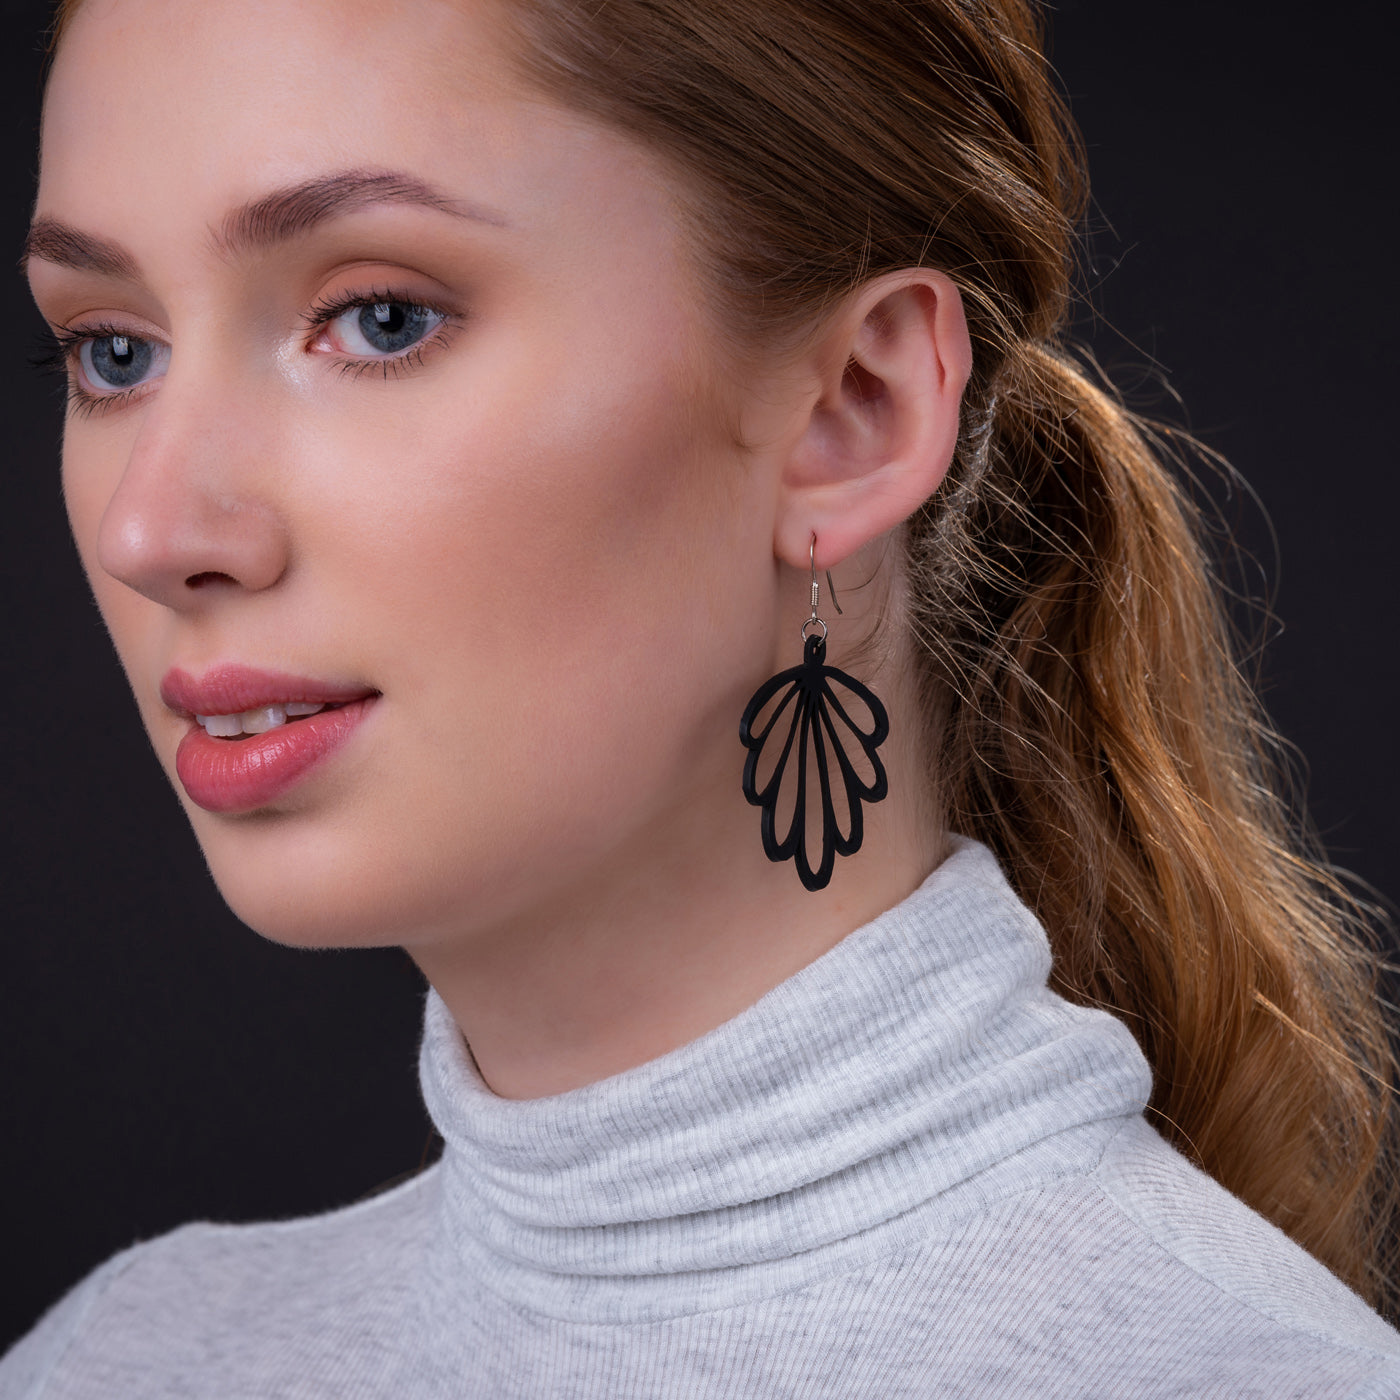 Shell Recycled Rubber Earrings by Paguro Upcycle